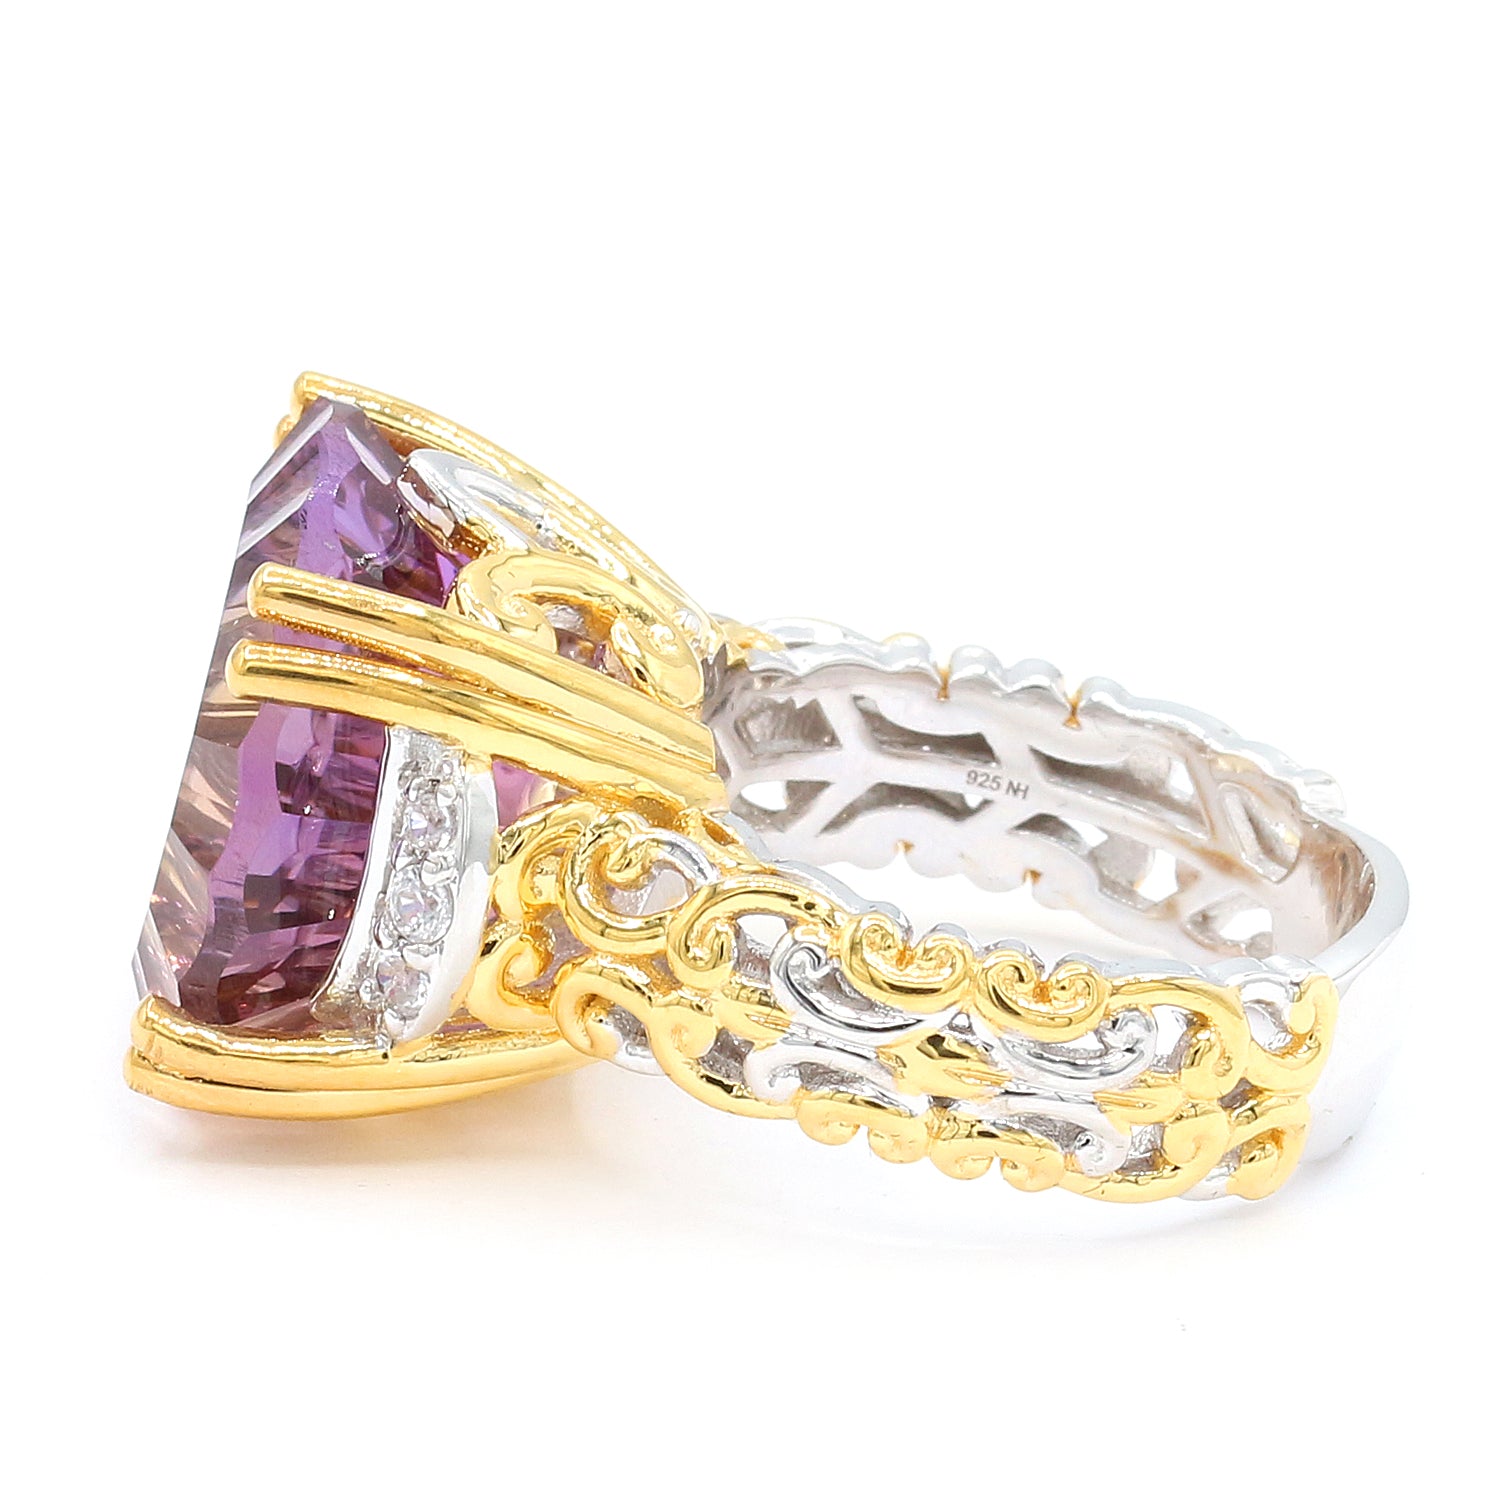 Limited Edition Gems en Vogue Luxe, One-of-a-Kind 20.00ctw Ametrine & White Zircon Honker Ring